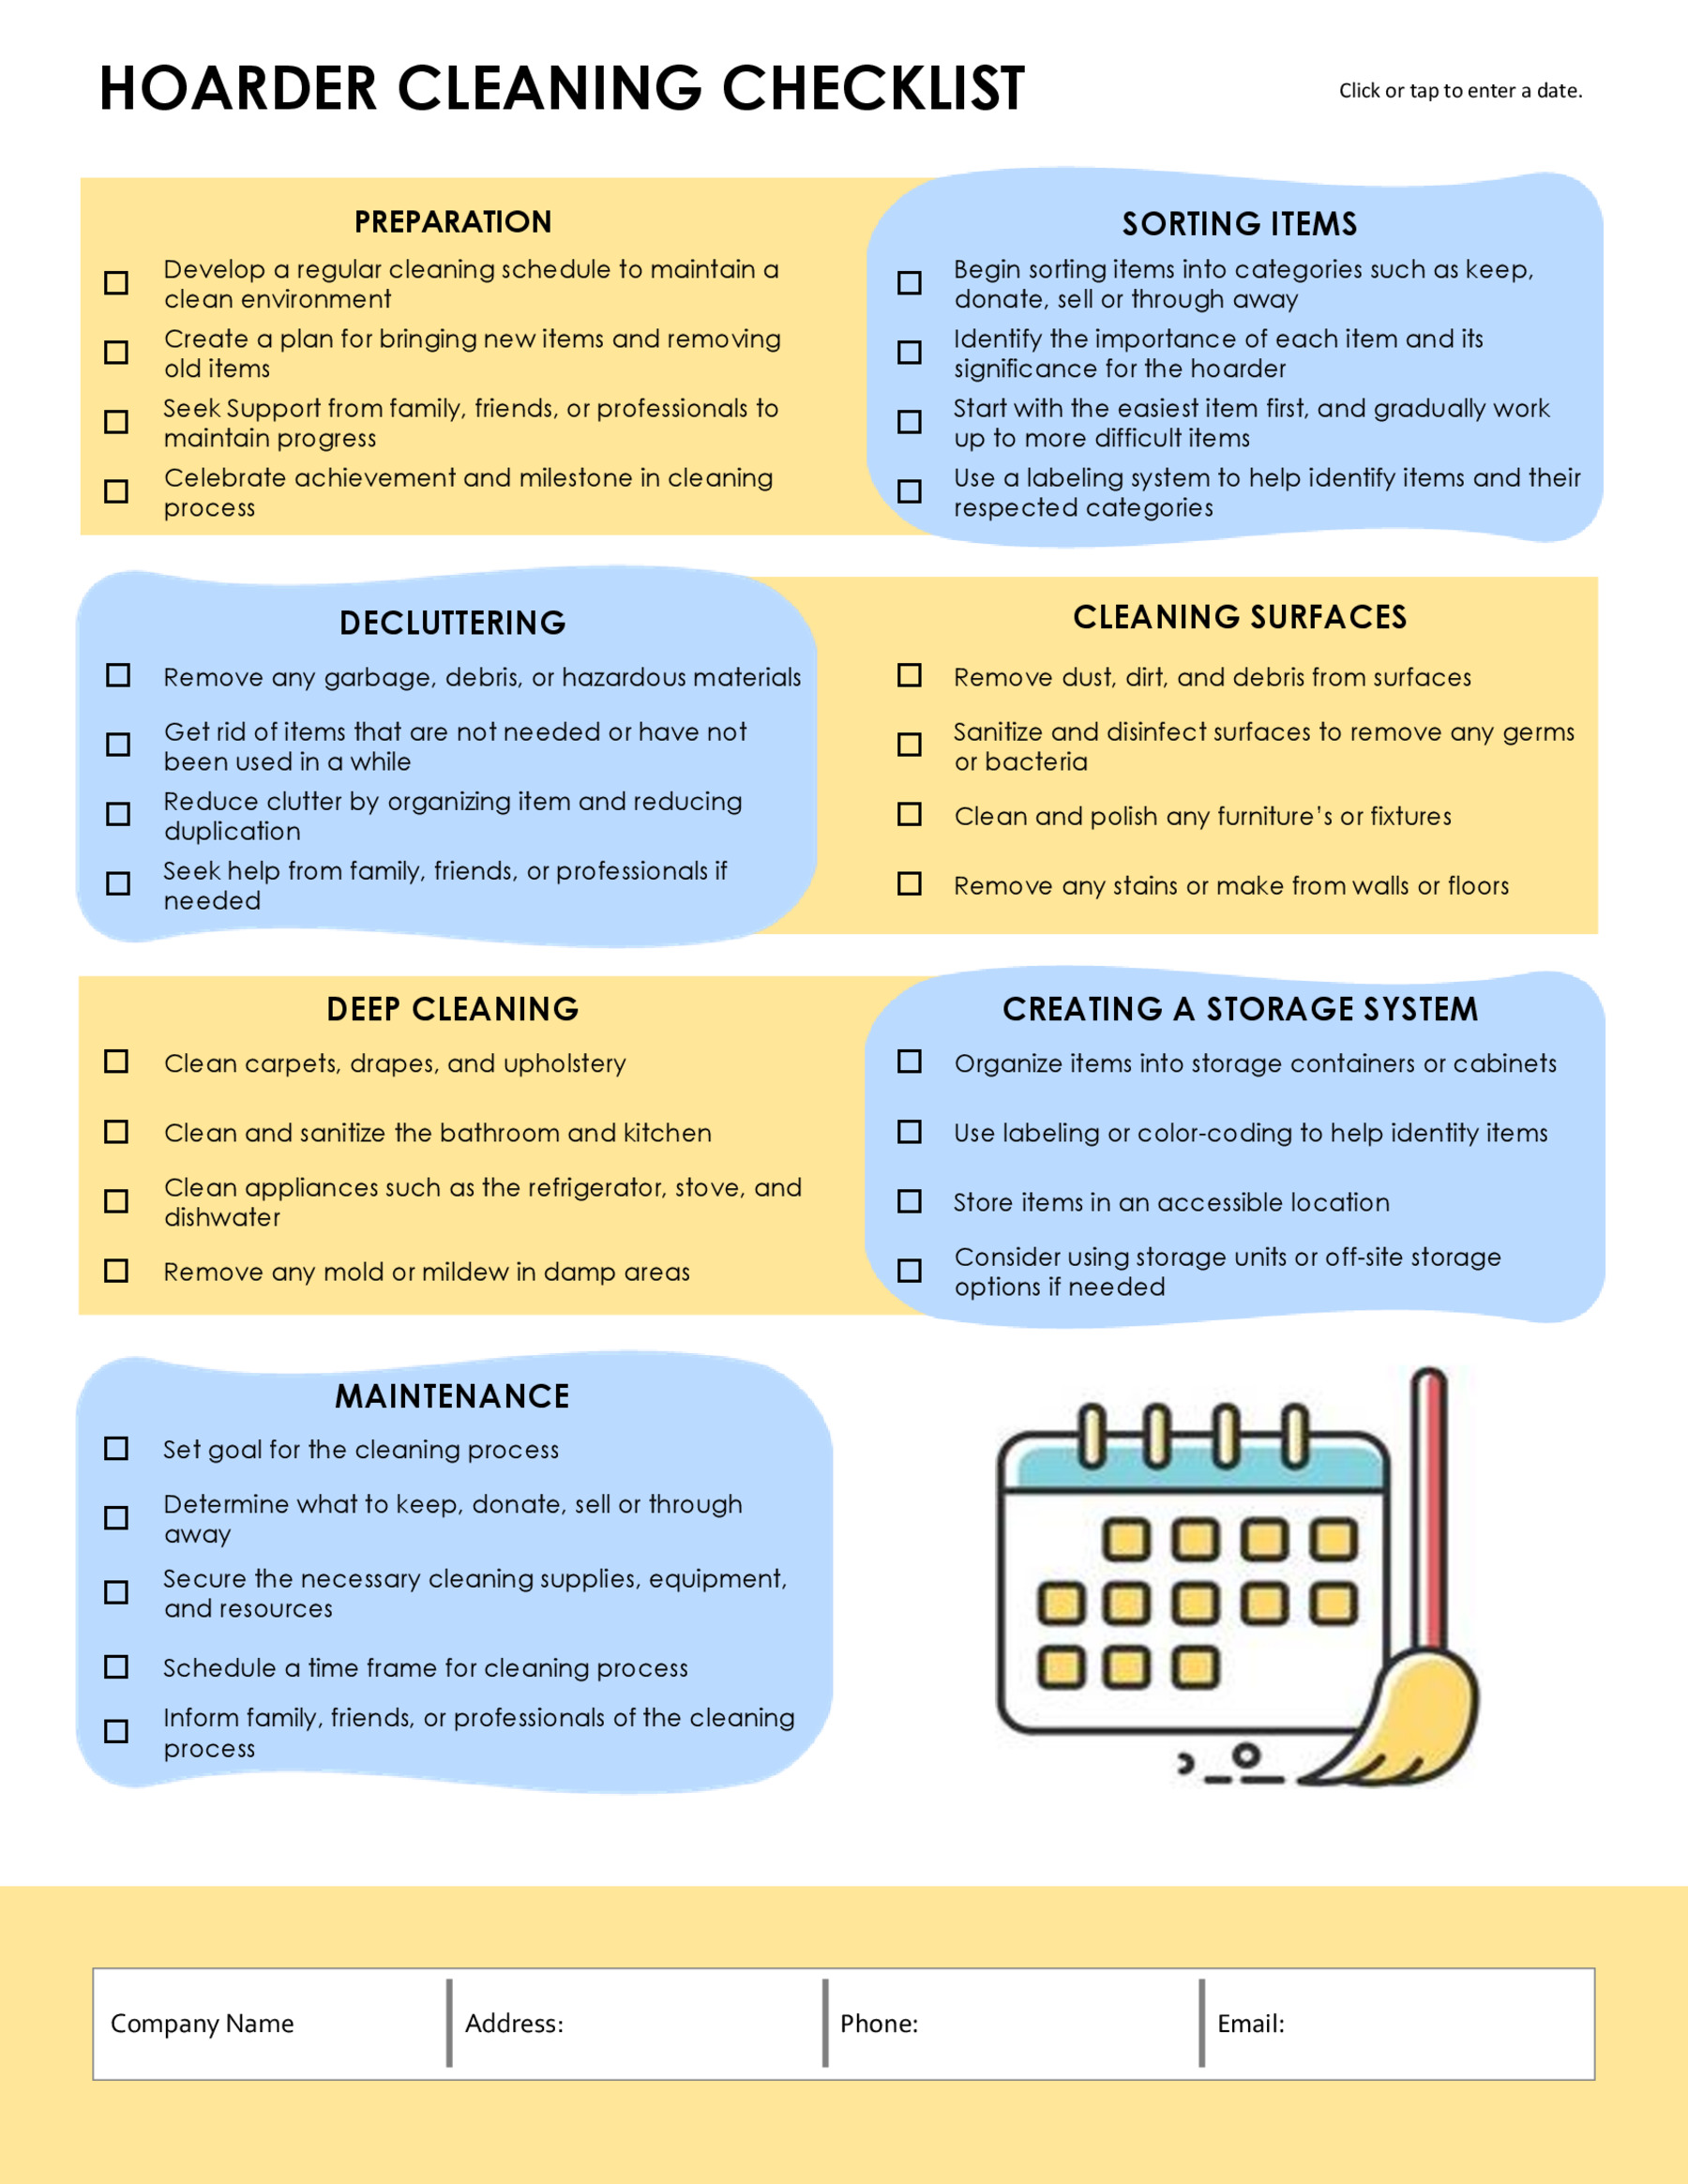 Free Hoarder Cleaning Checklist Template - Editable Format